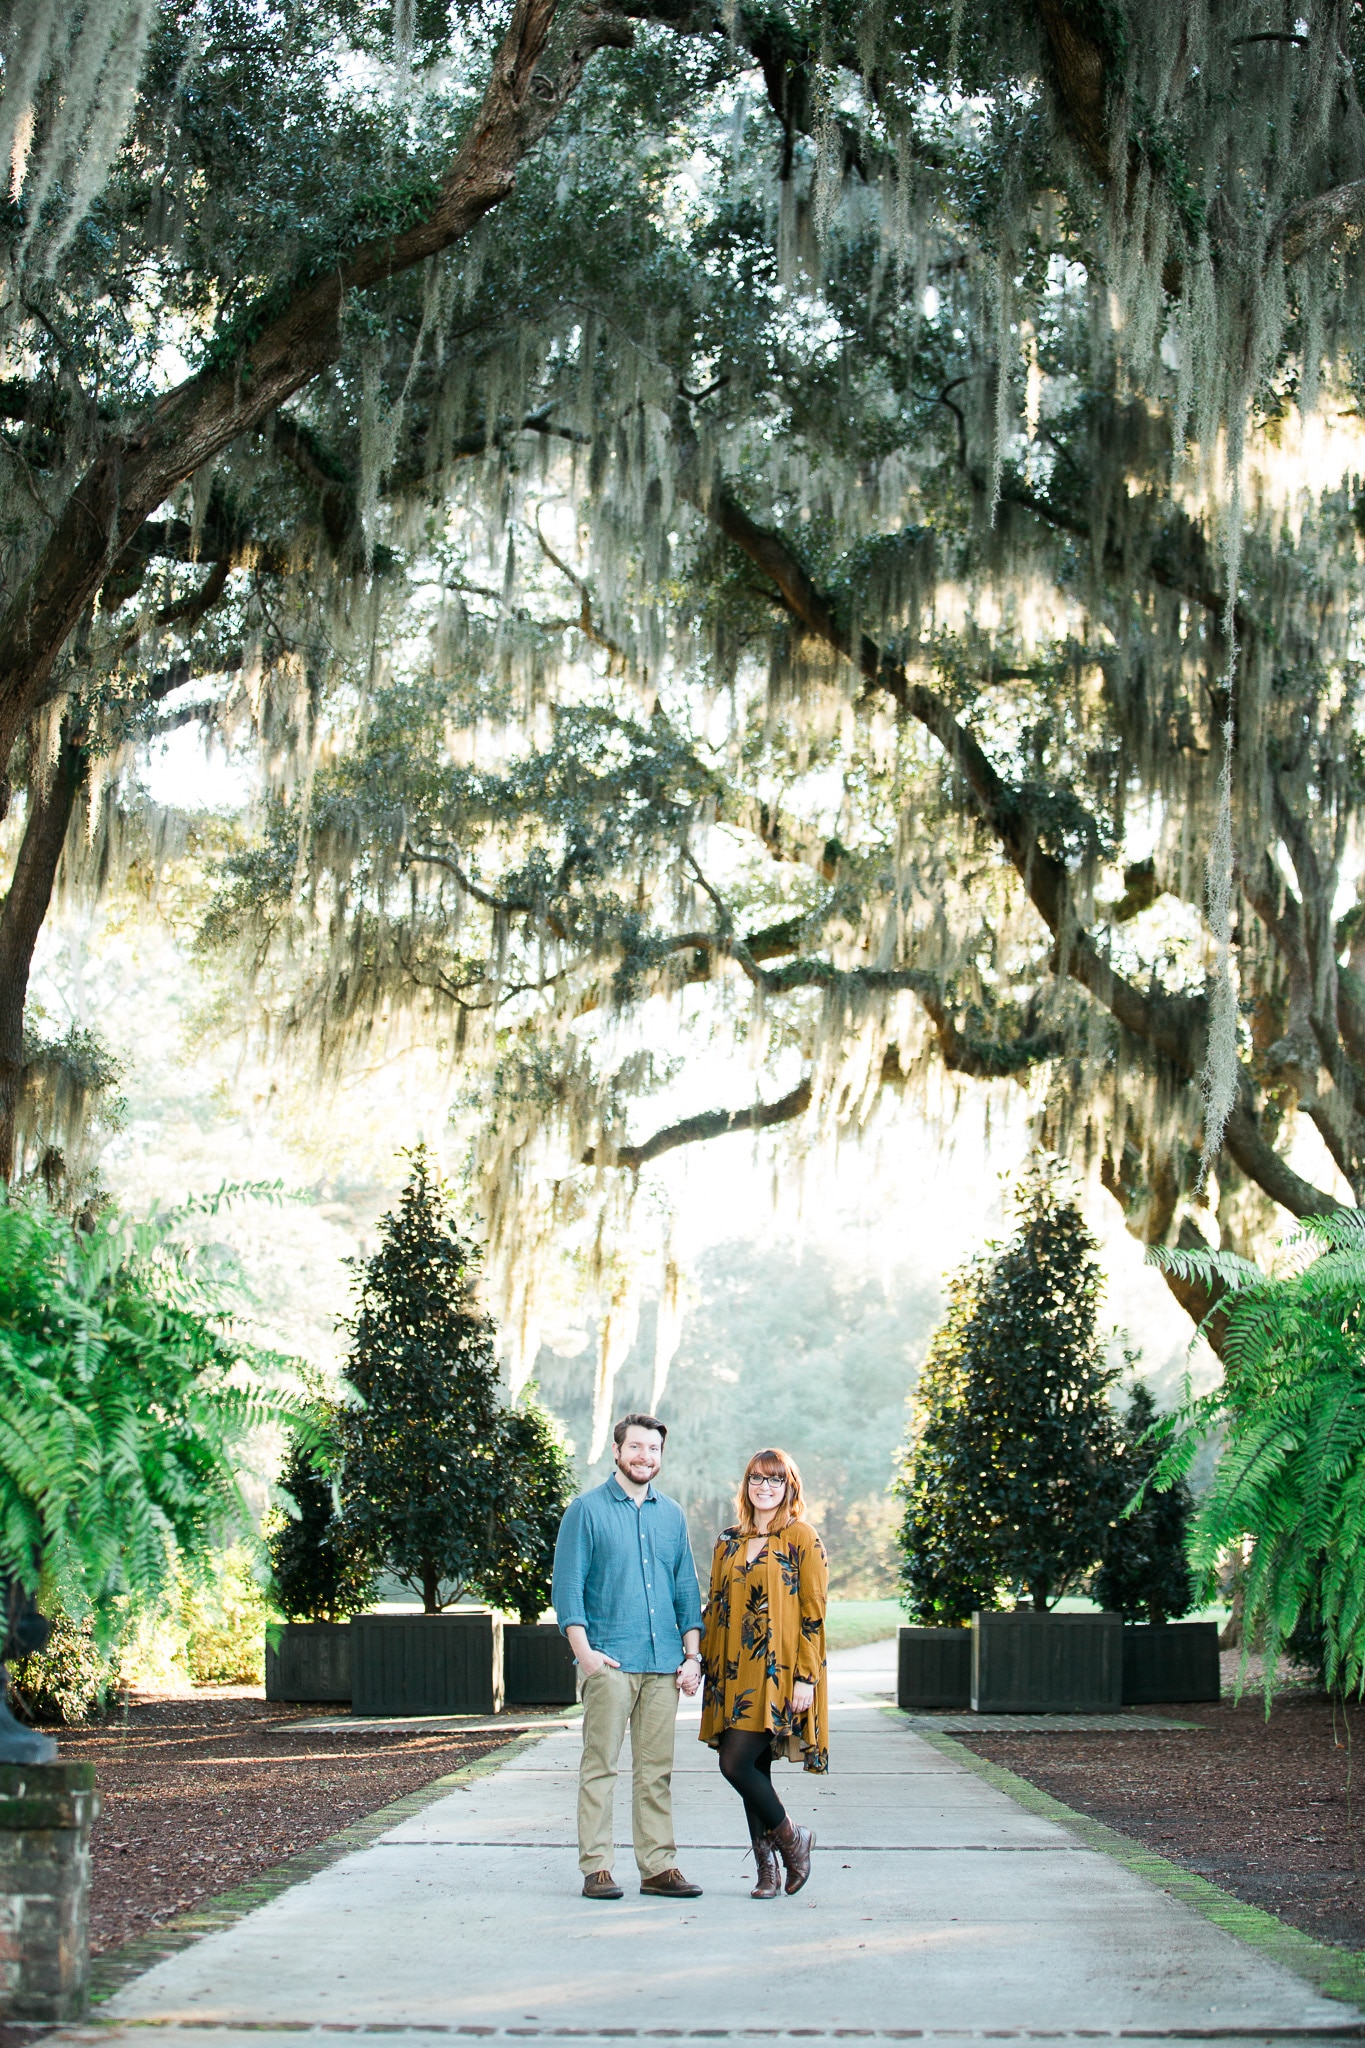 Brian and Kelsey smiling holding hands under the whispy trees, Caledonia Golf and Fish Club, Myrtle Beach Engagement Session 18, www.onelifephoto.net